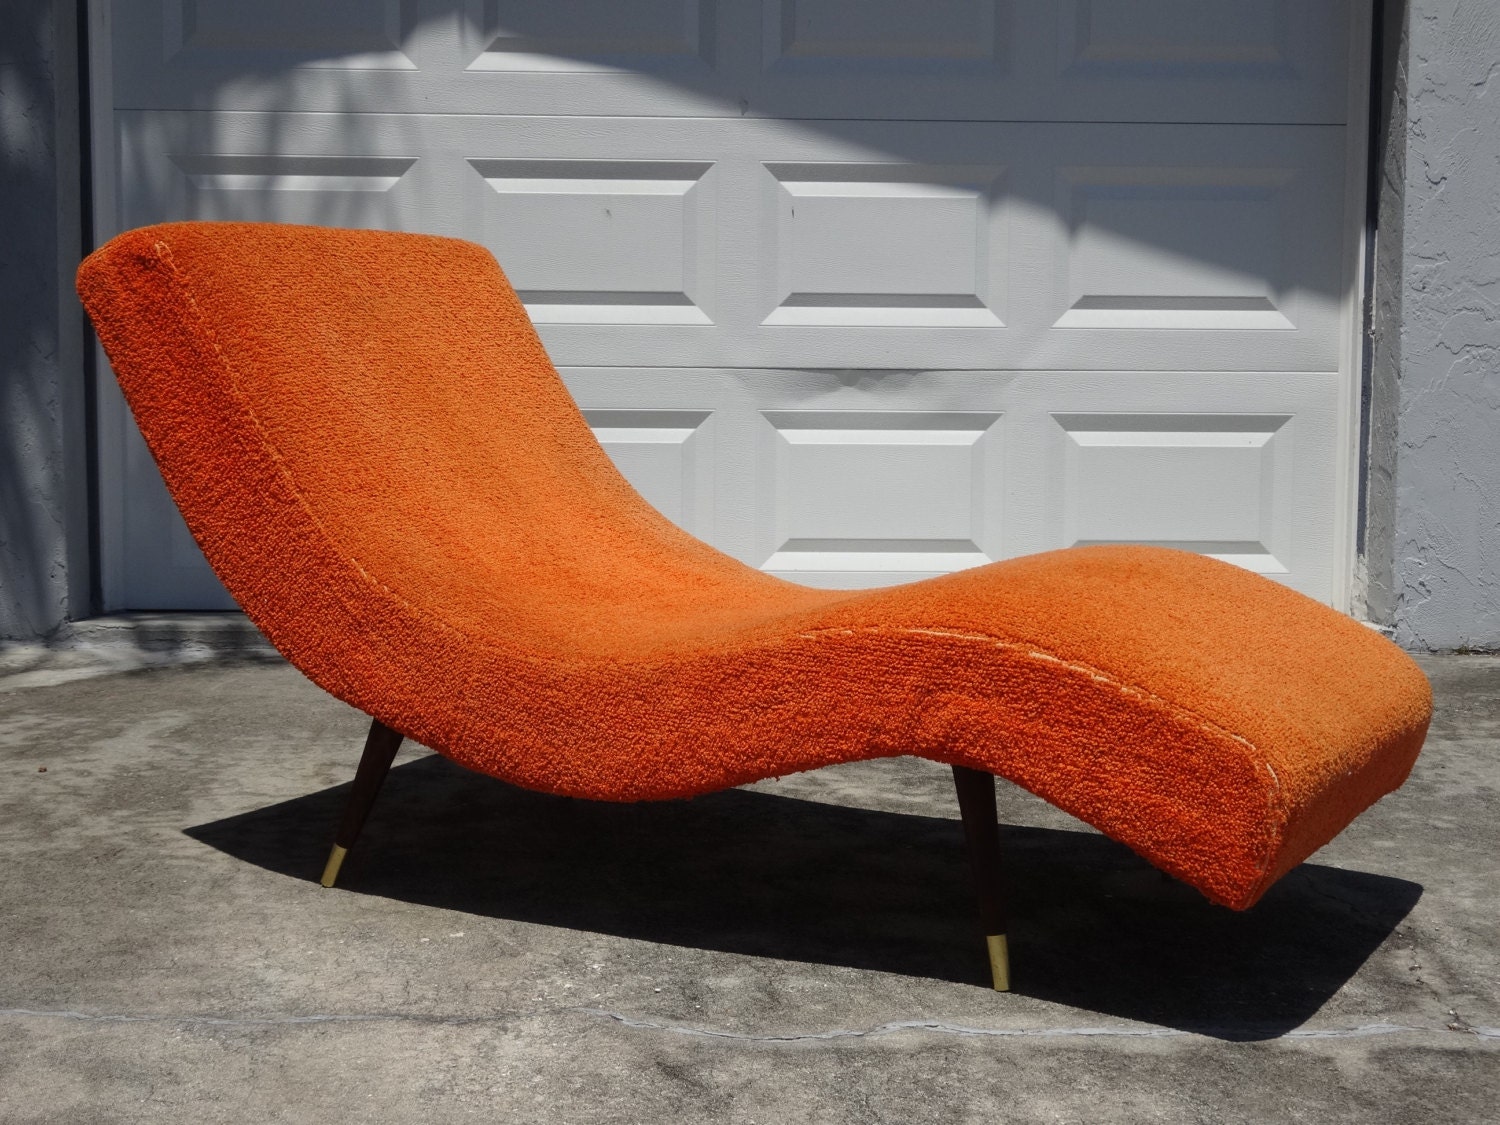 Groovy Original 1950’s Mid Century Modern Adrian Pearsall “WAVE” Chaise